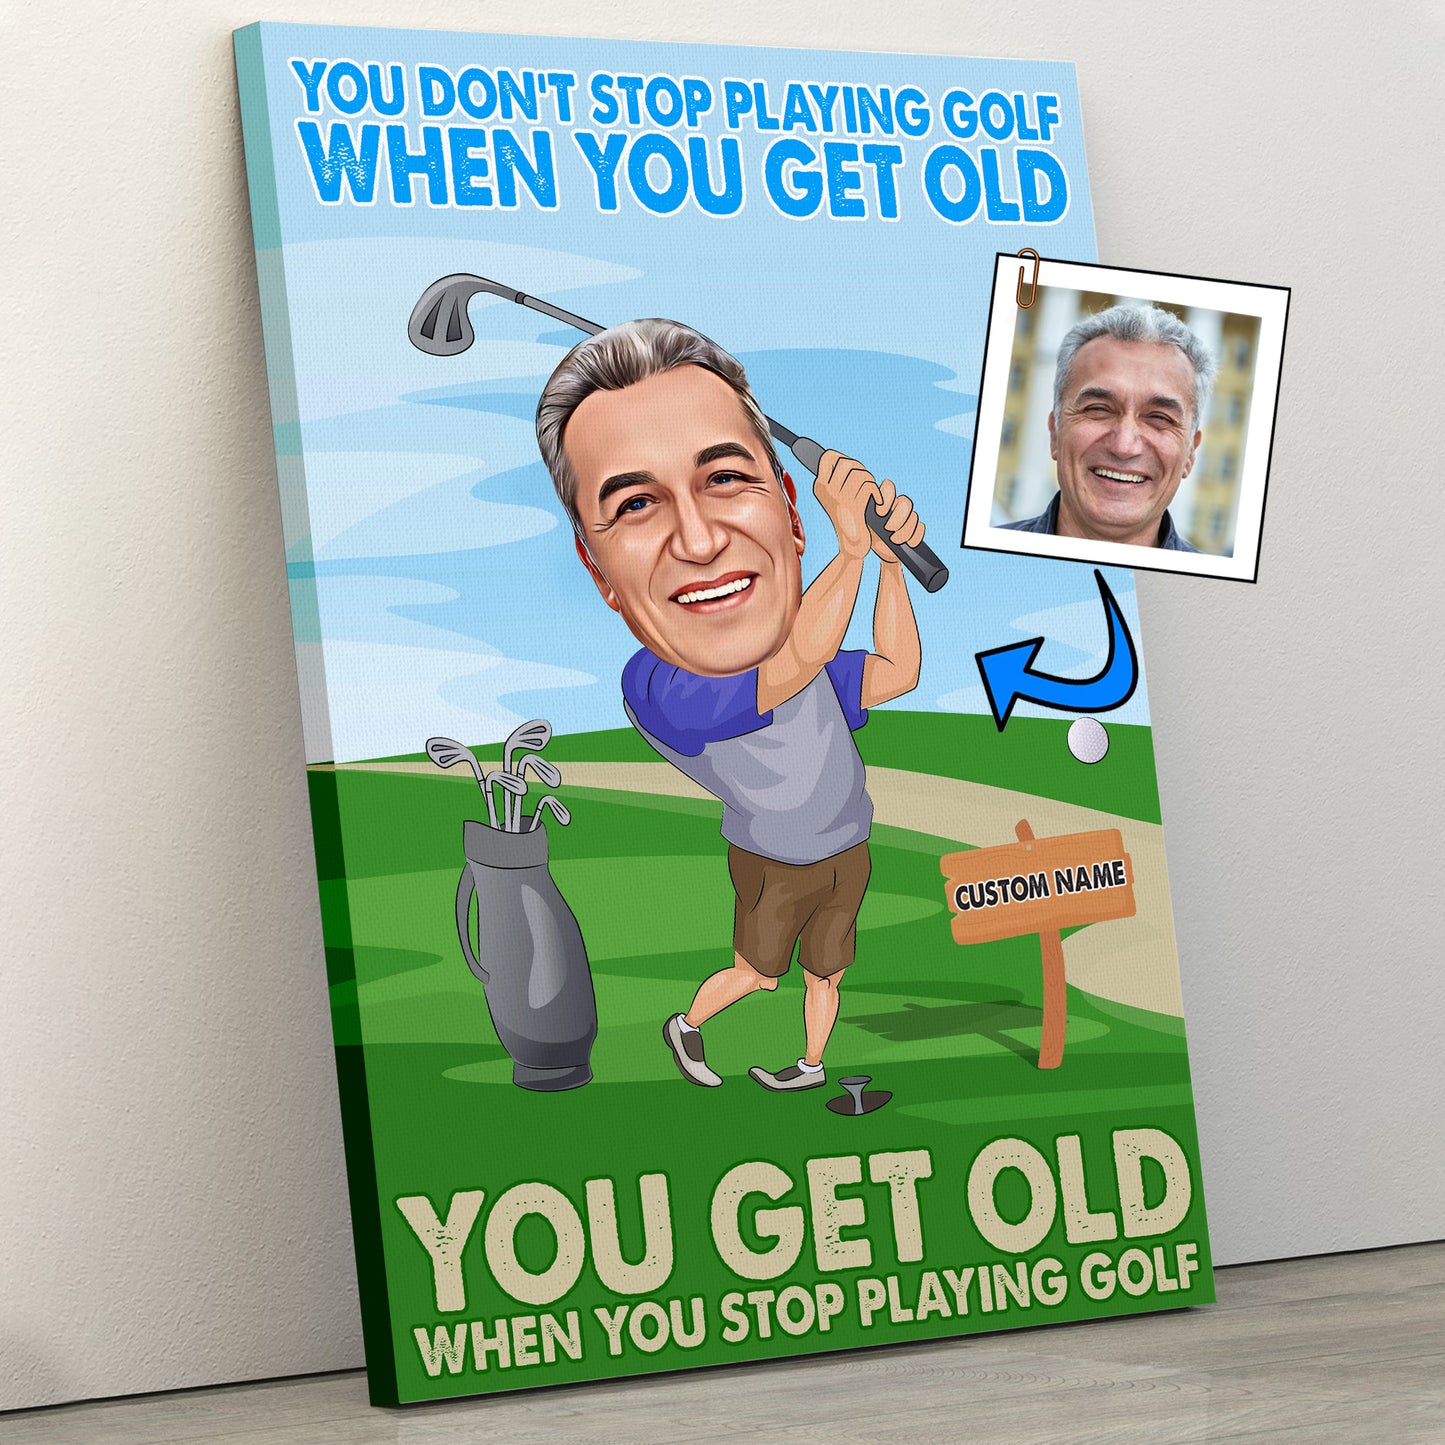 Golf Gifts For Men, Caricature Golfer Portrait, Golfing Golf Club Decor Gift, Personalized Golf Birthday Gifts Men Women Dad Mom - You don't stop playing golf when you get old, you get old when you stop playing golf